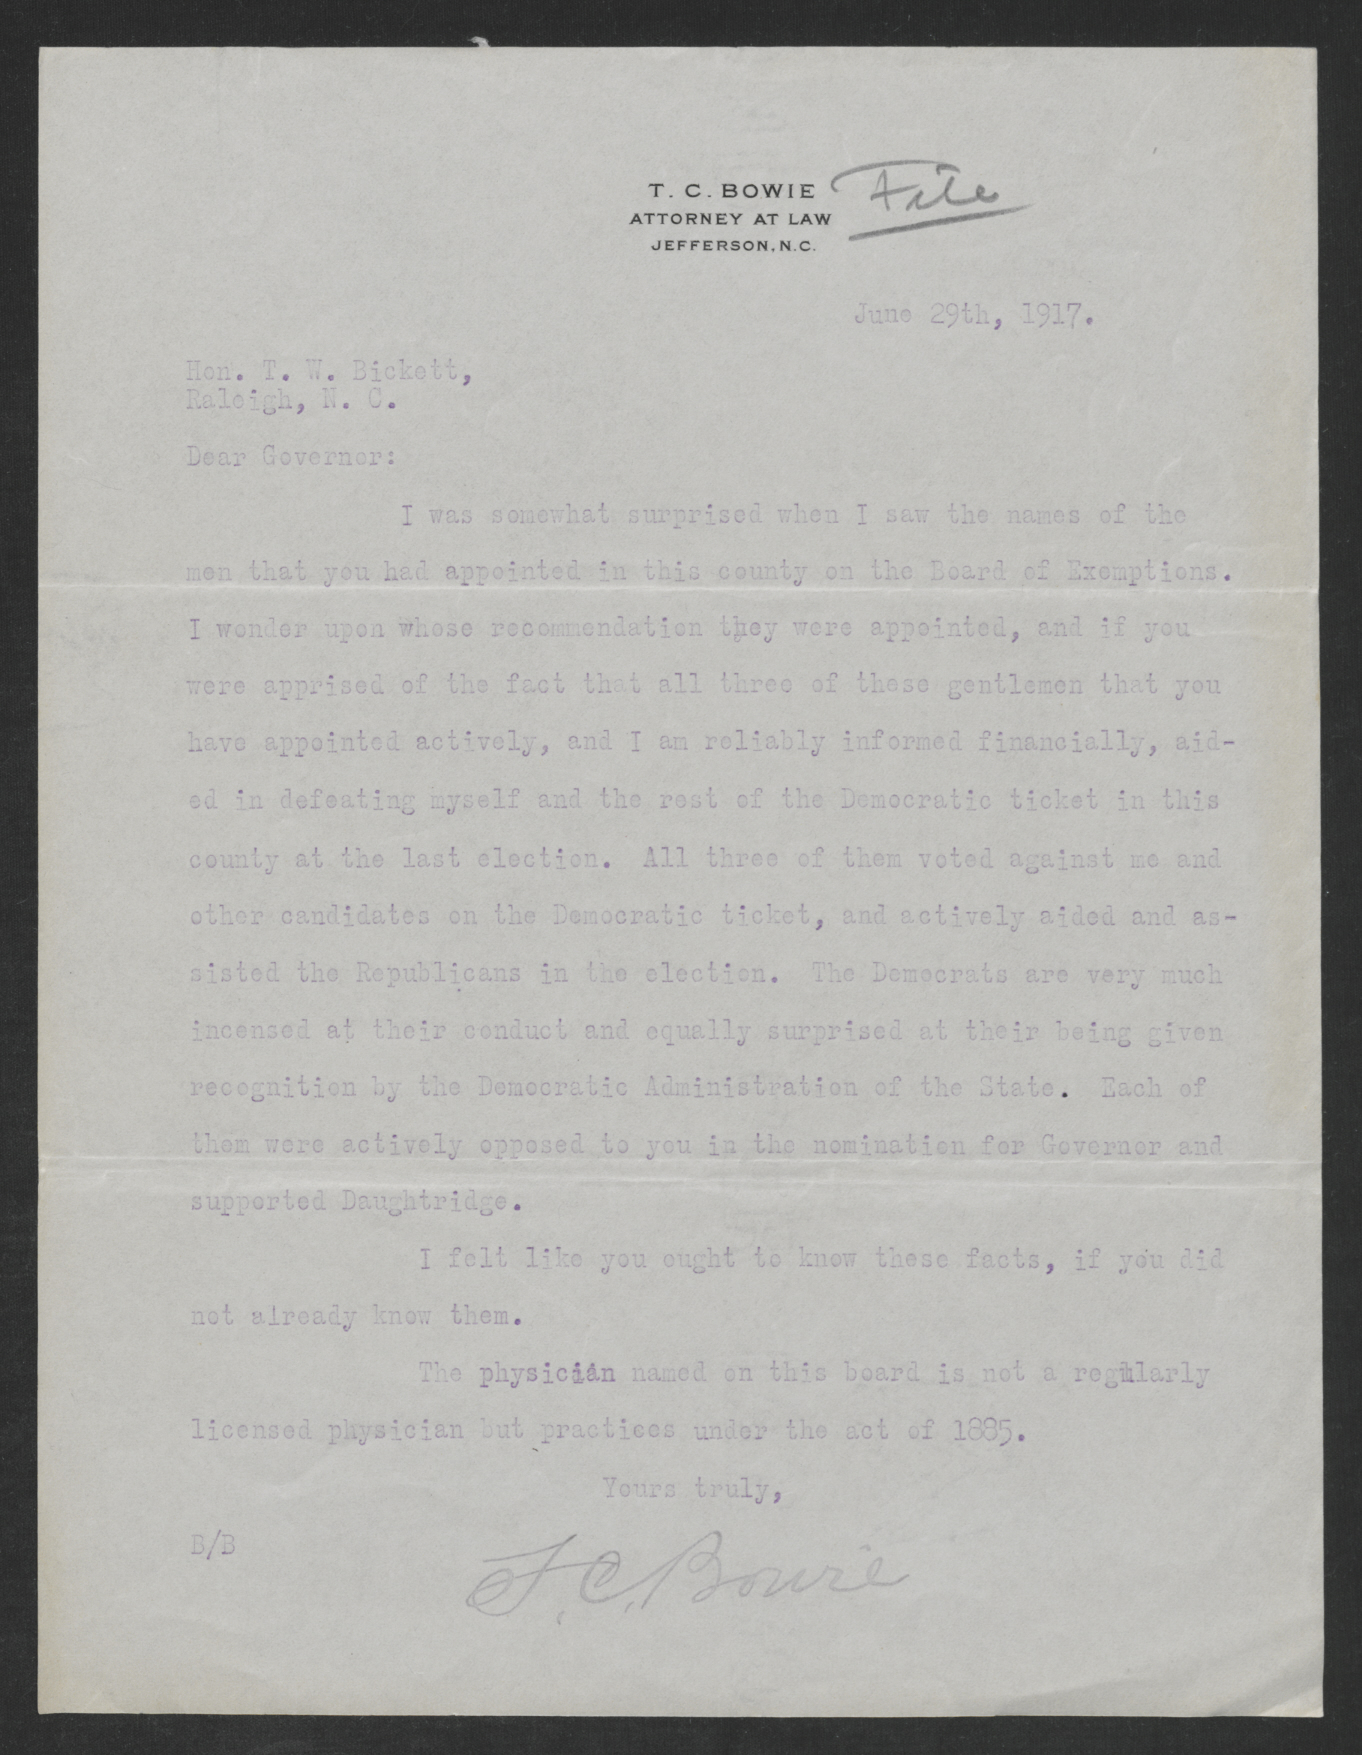 Letter from Thomas C. Bowie to Thomas W. Bickett, June 29, 1917